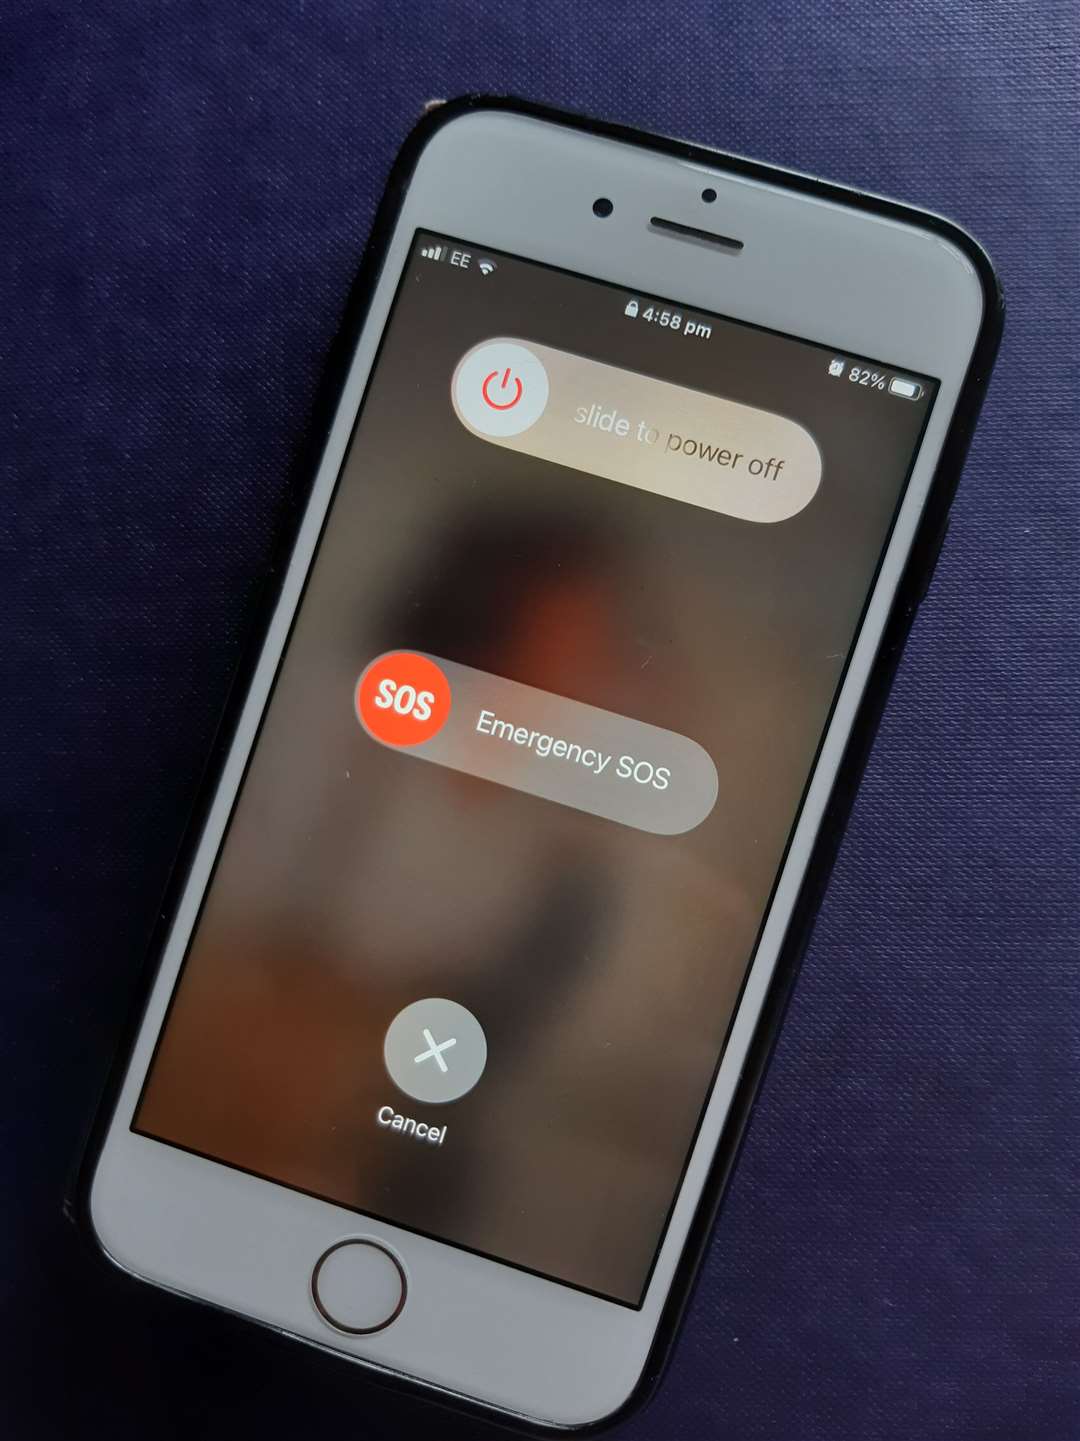 If you click the lock button on the side of your iPhone it will give you the option to discreetly call the police